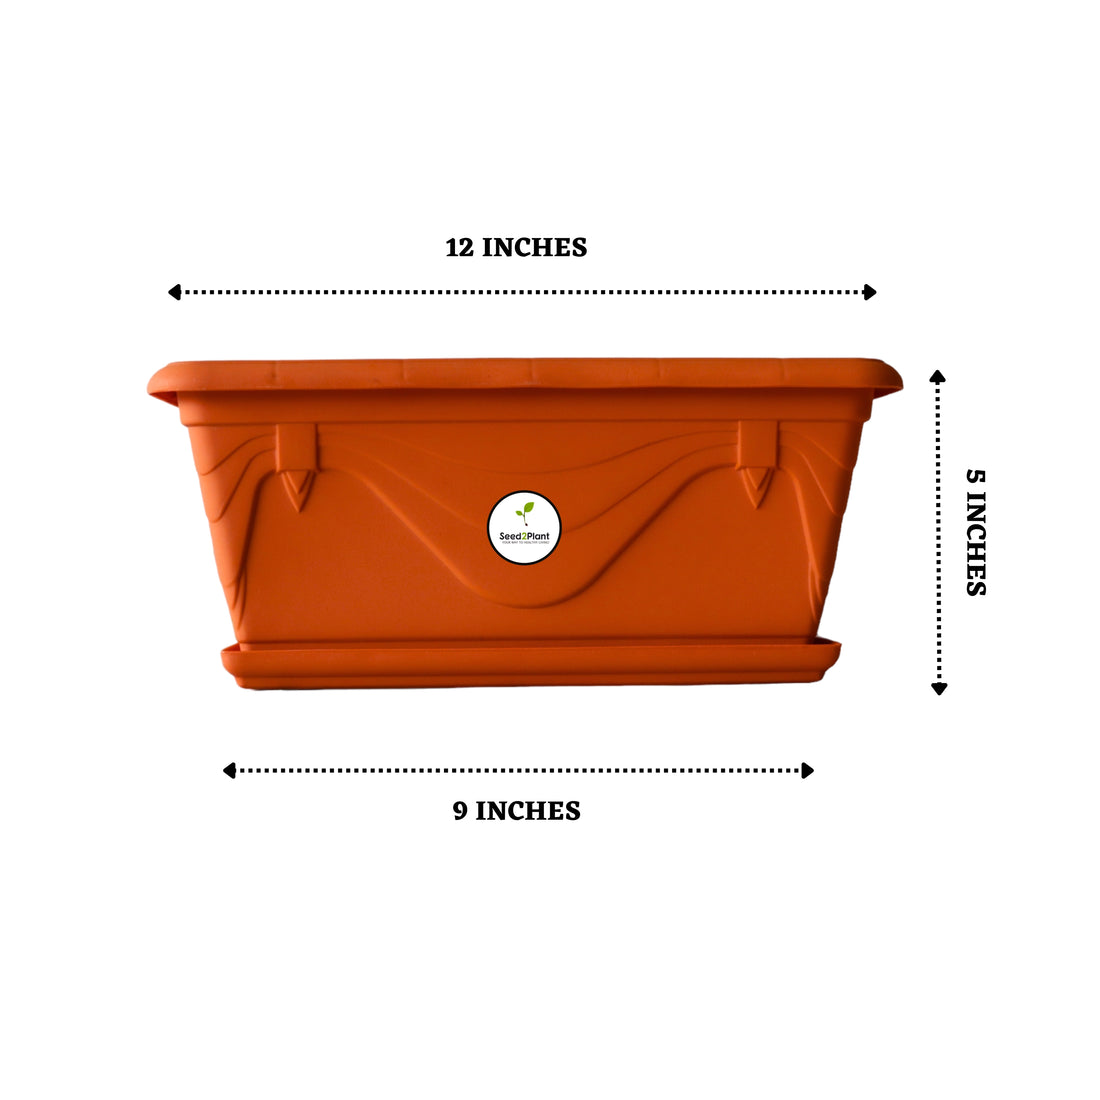 UV Treated Rectangular Plastic Planter Small with Tray - Terracotta Colour